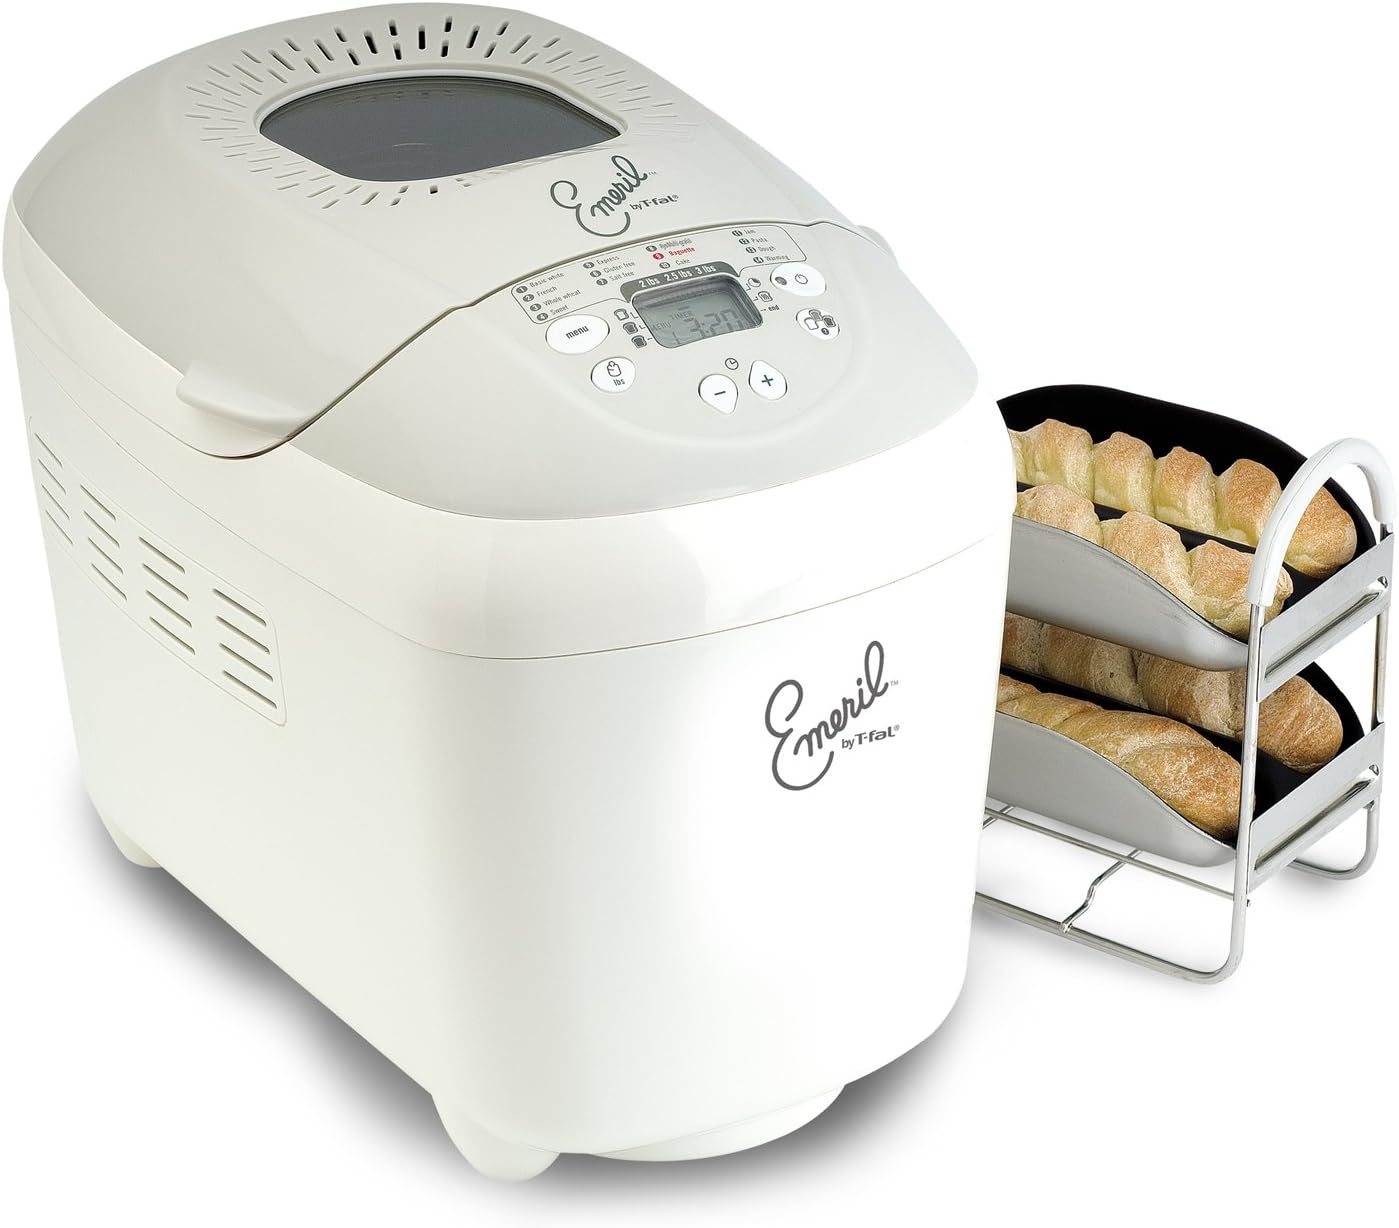 How To Make French Bread In Bread Machine